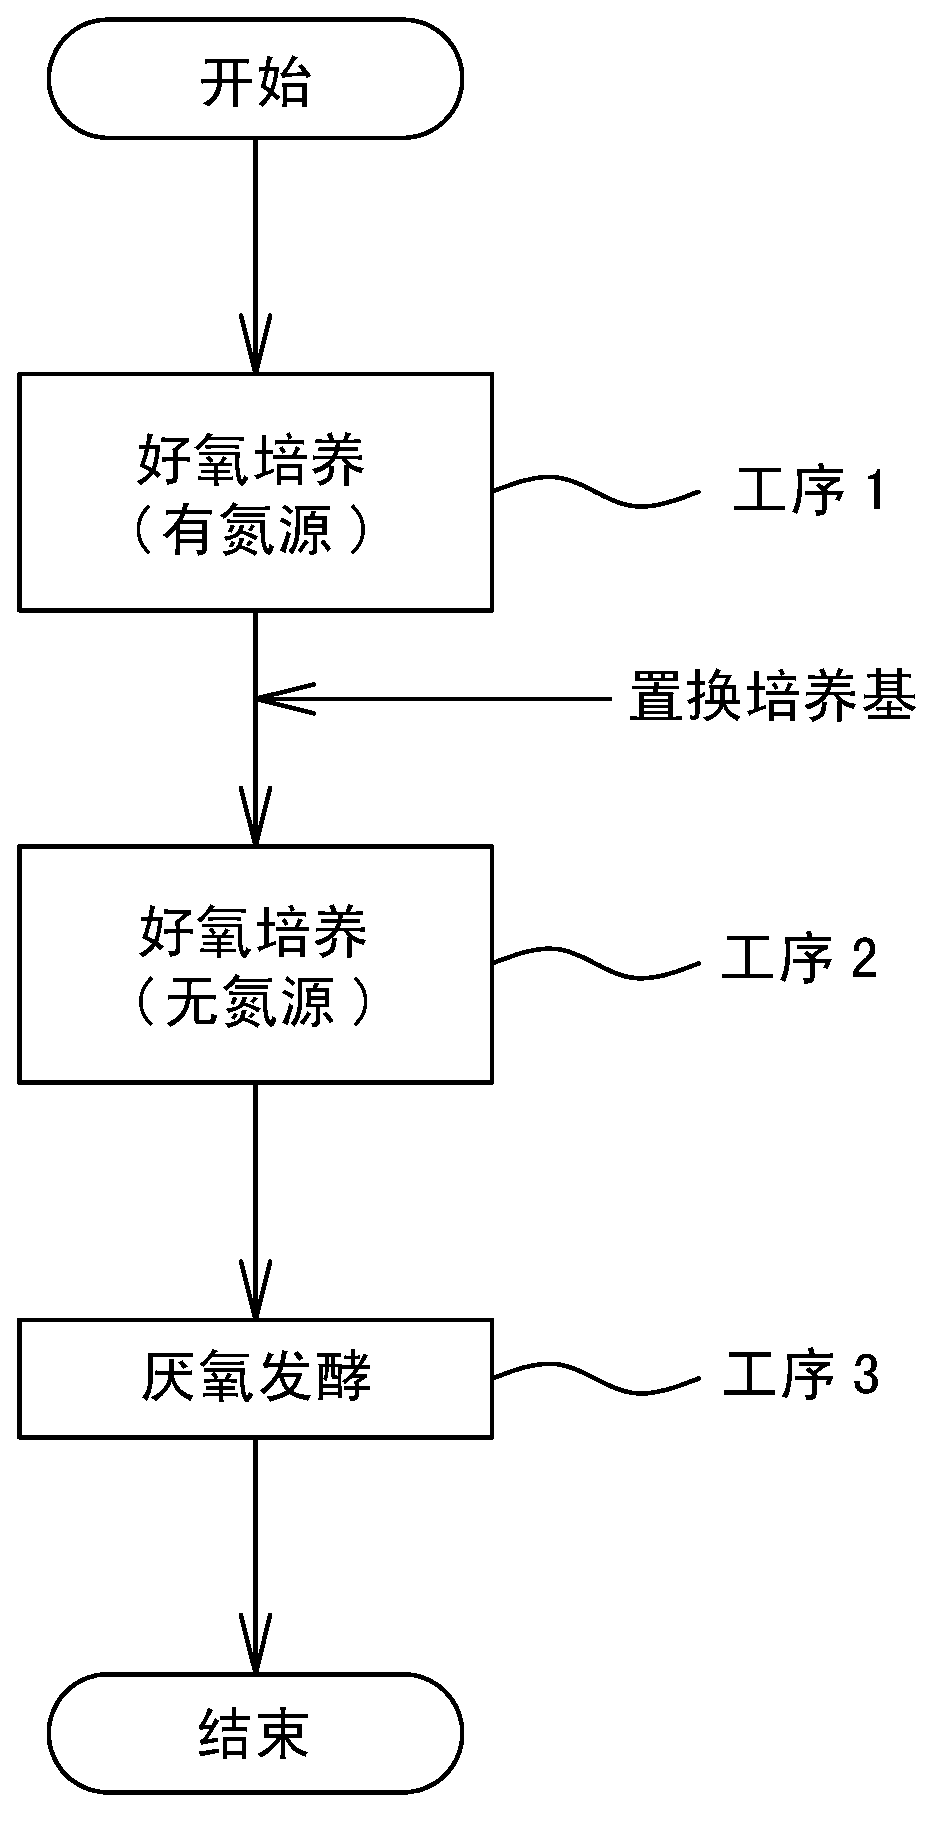 Process for production of euglena containing wax ester at high content, and process for production of wax ester